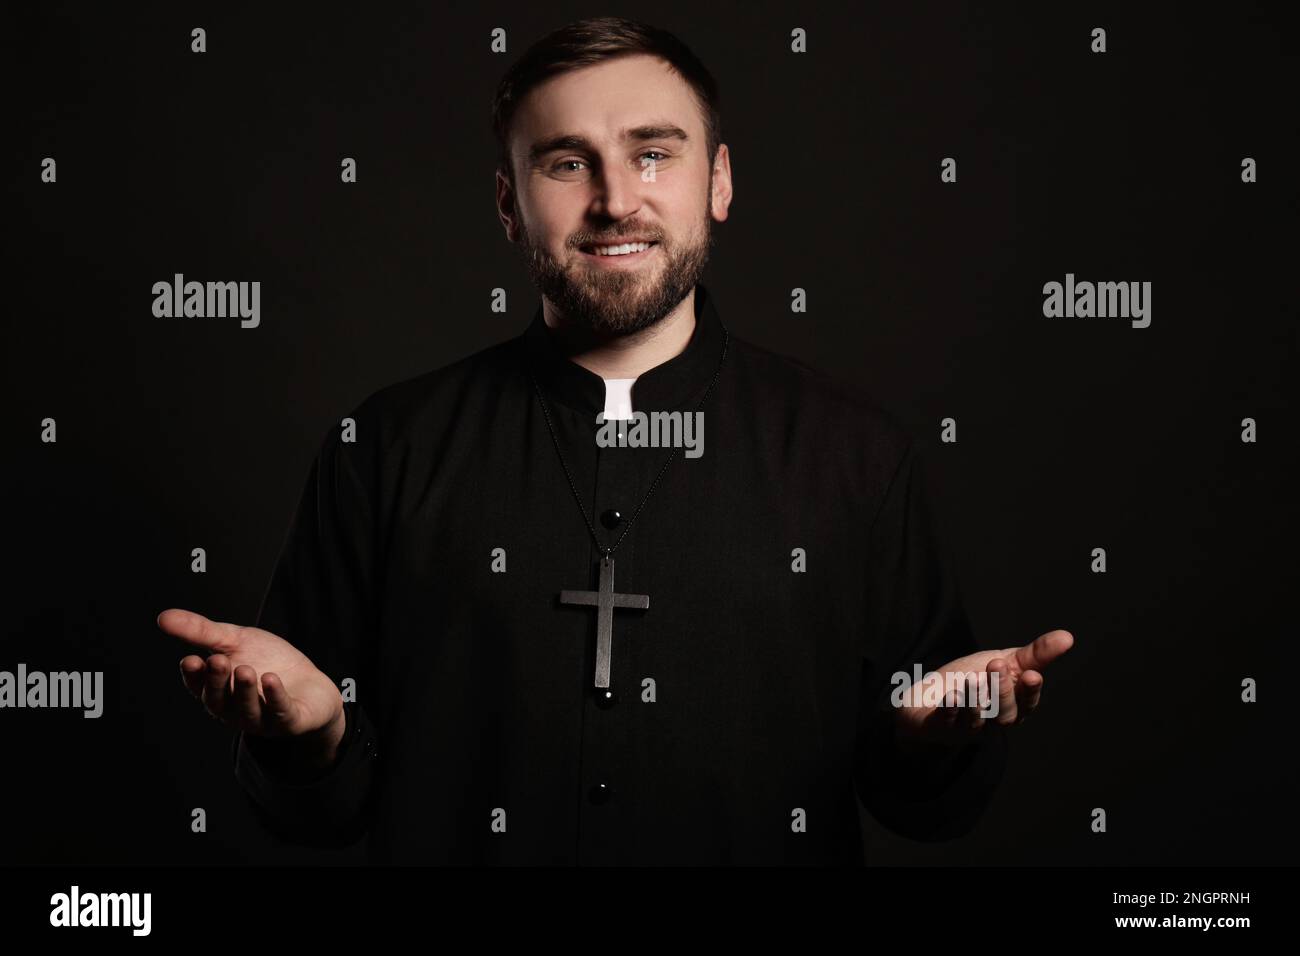 Priest wearing cassock with clerical collar on black background Stock Photo